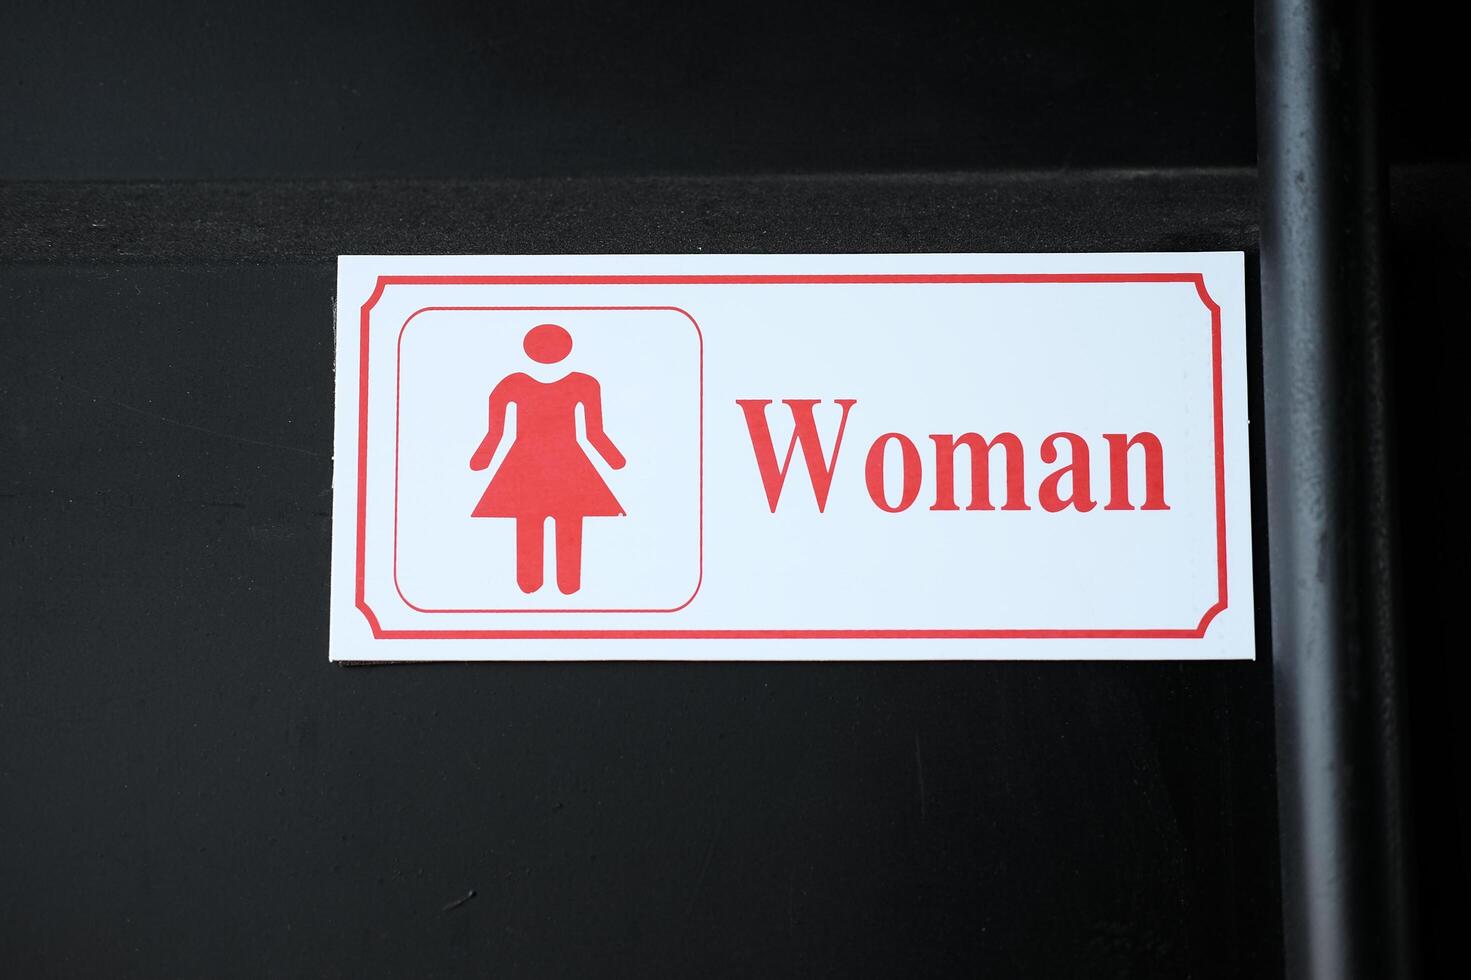 Woman Toilet sign and symbols photo